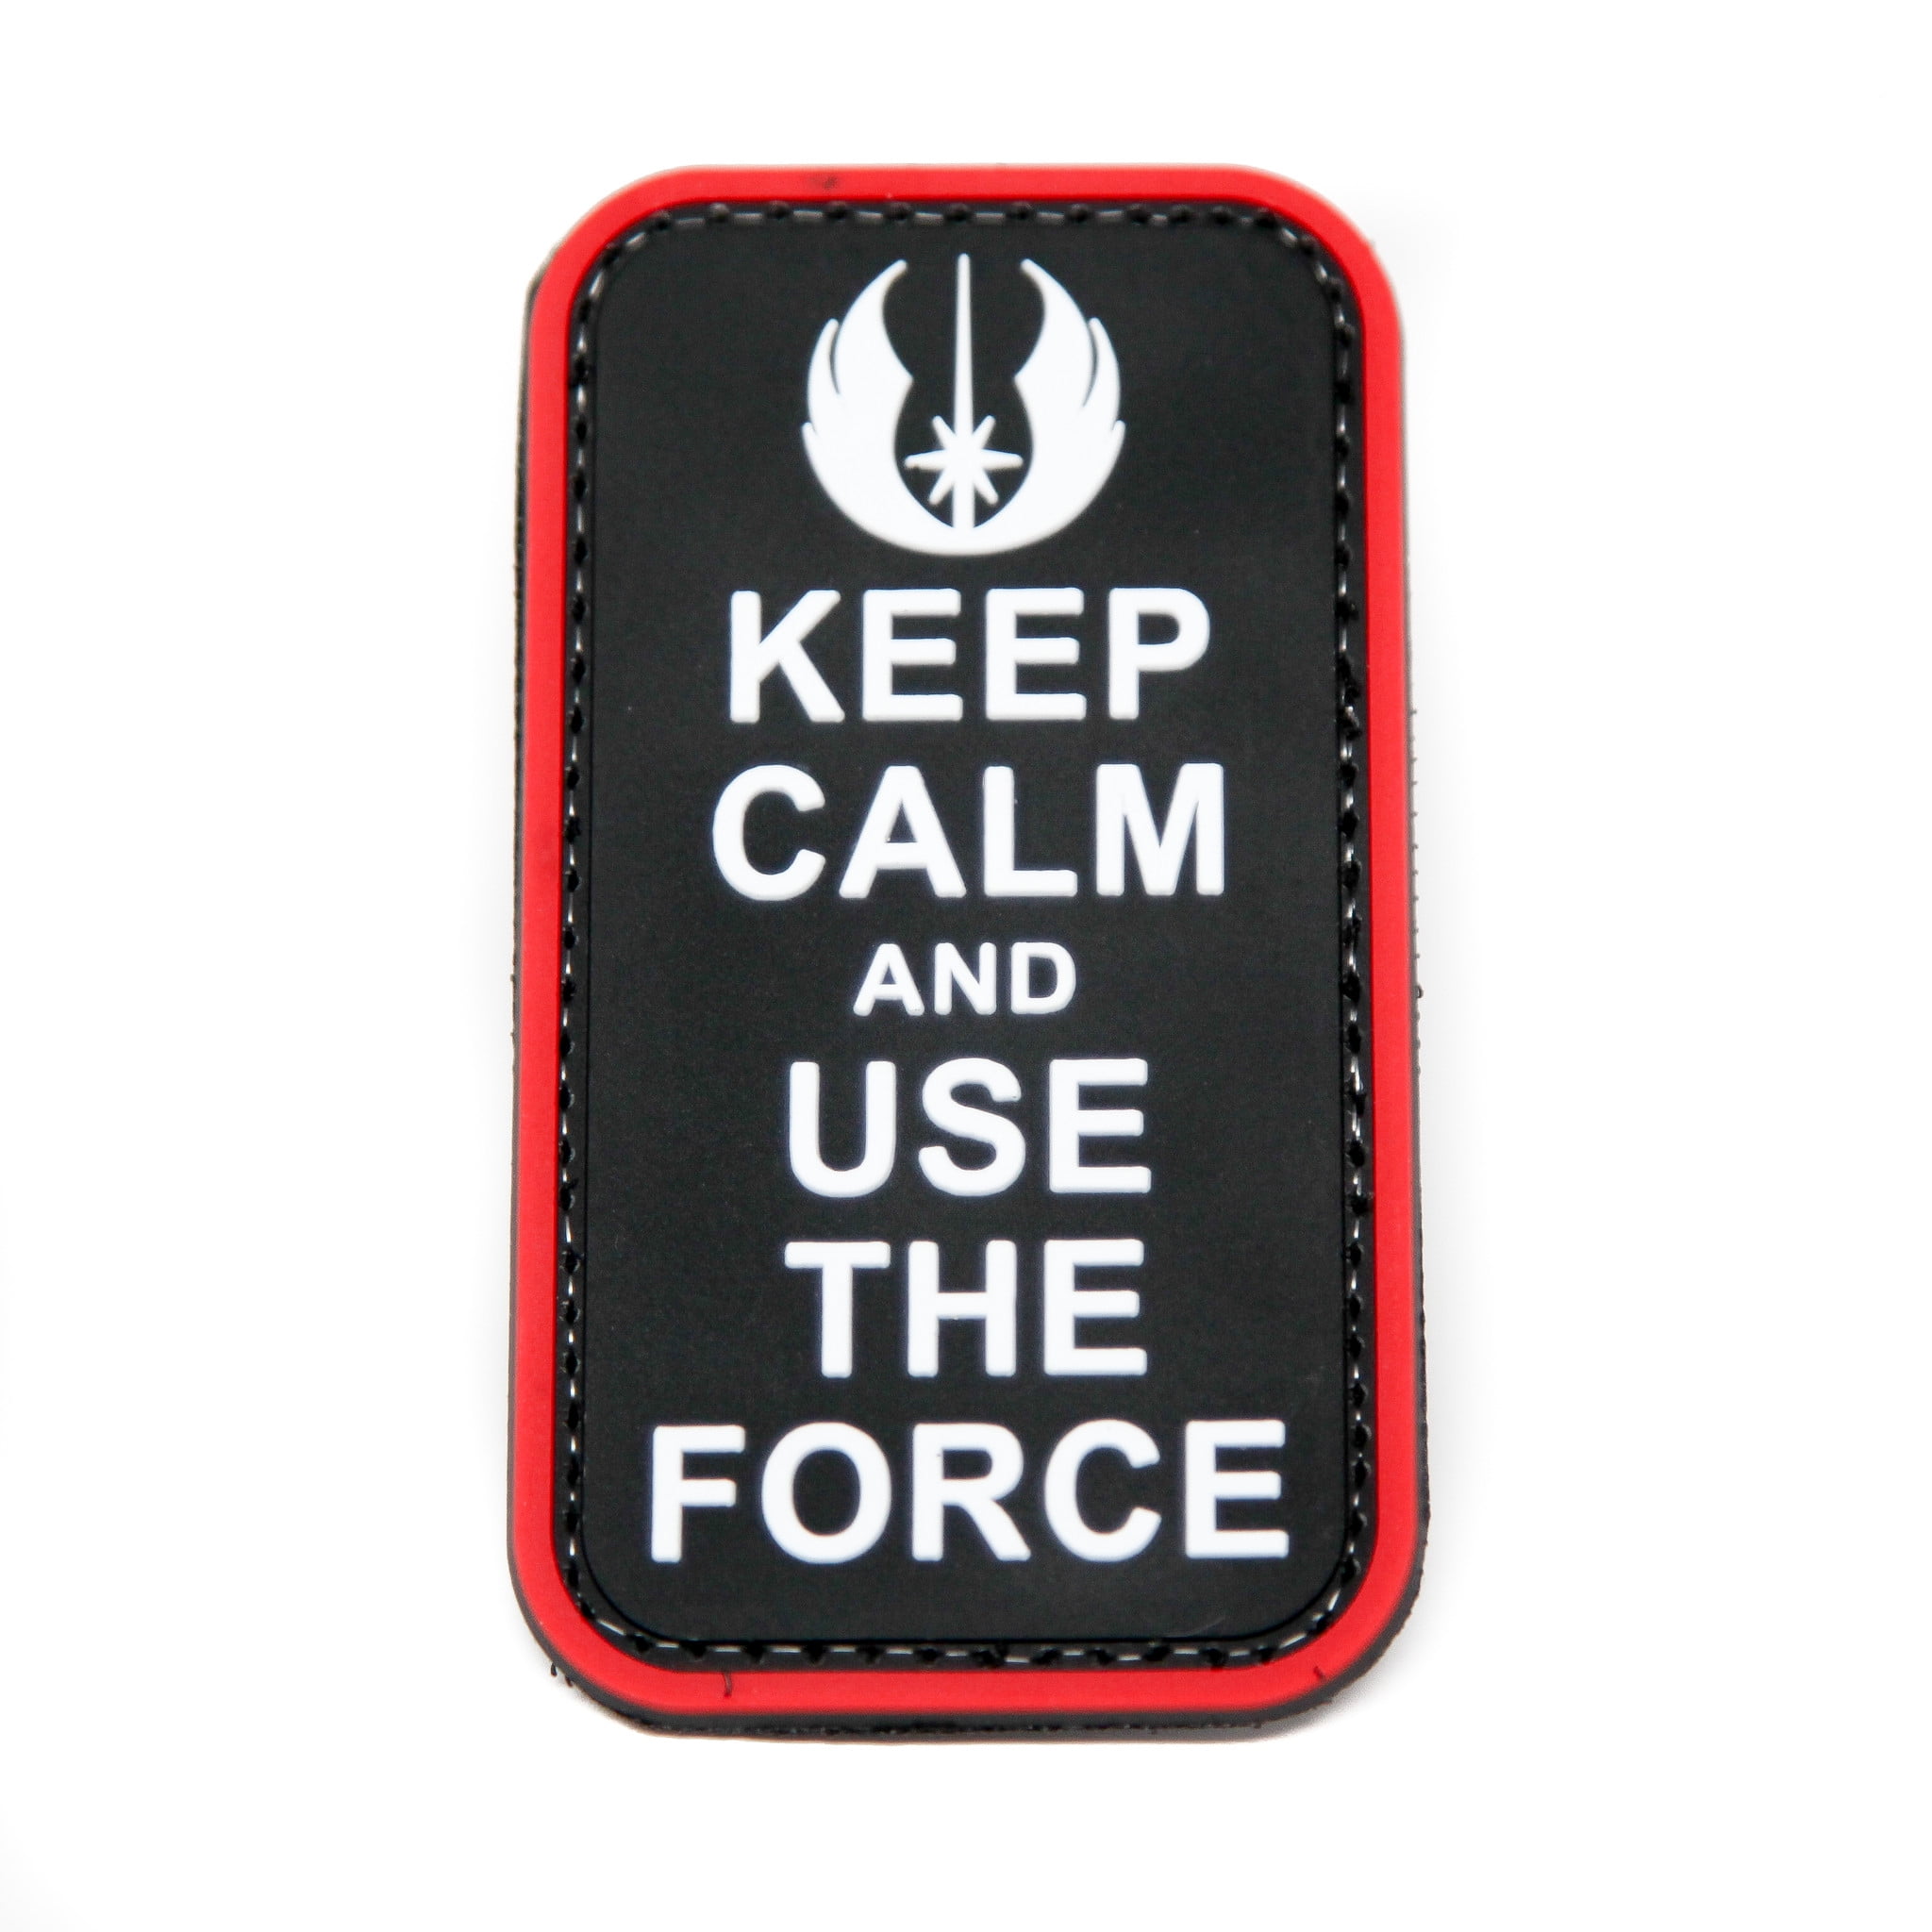 Plante sav Koge Keep Calm And Use The Force Star Wars Jedi Emblem PVC Morale Patch, Velcro  Morale Patch by NEO Tactical Gear - Walmart.com